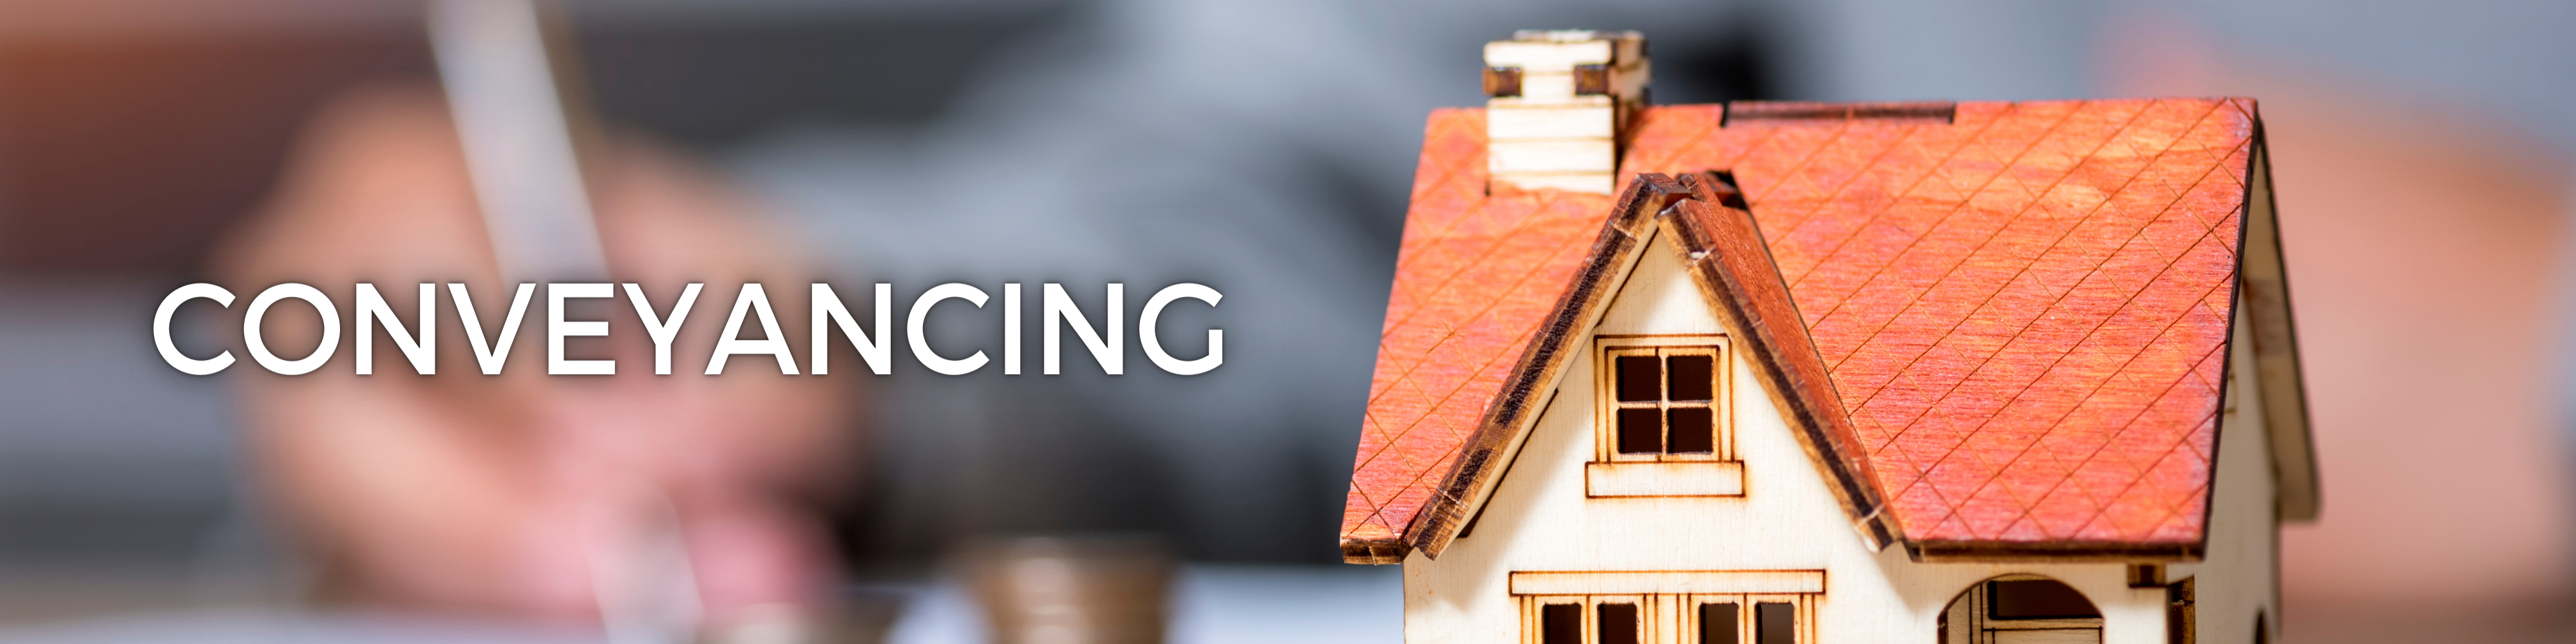 Conveyancing | DCS Financial Limited